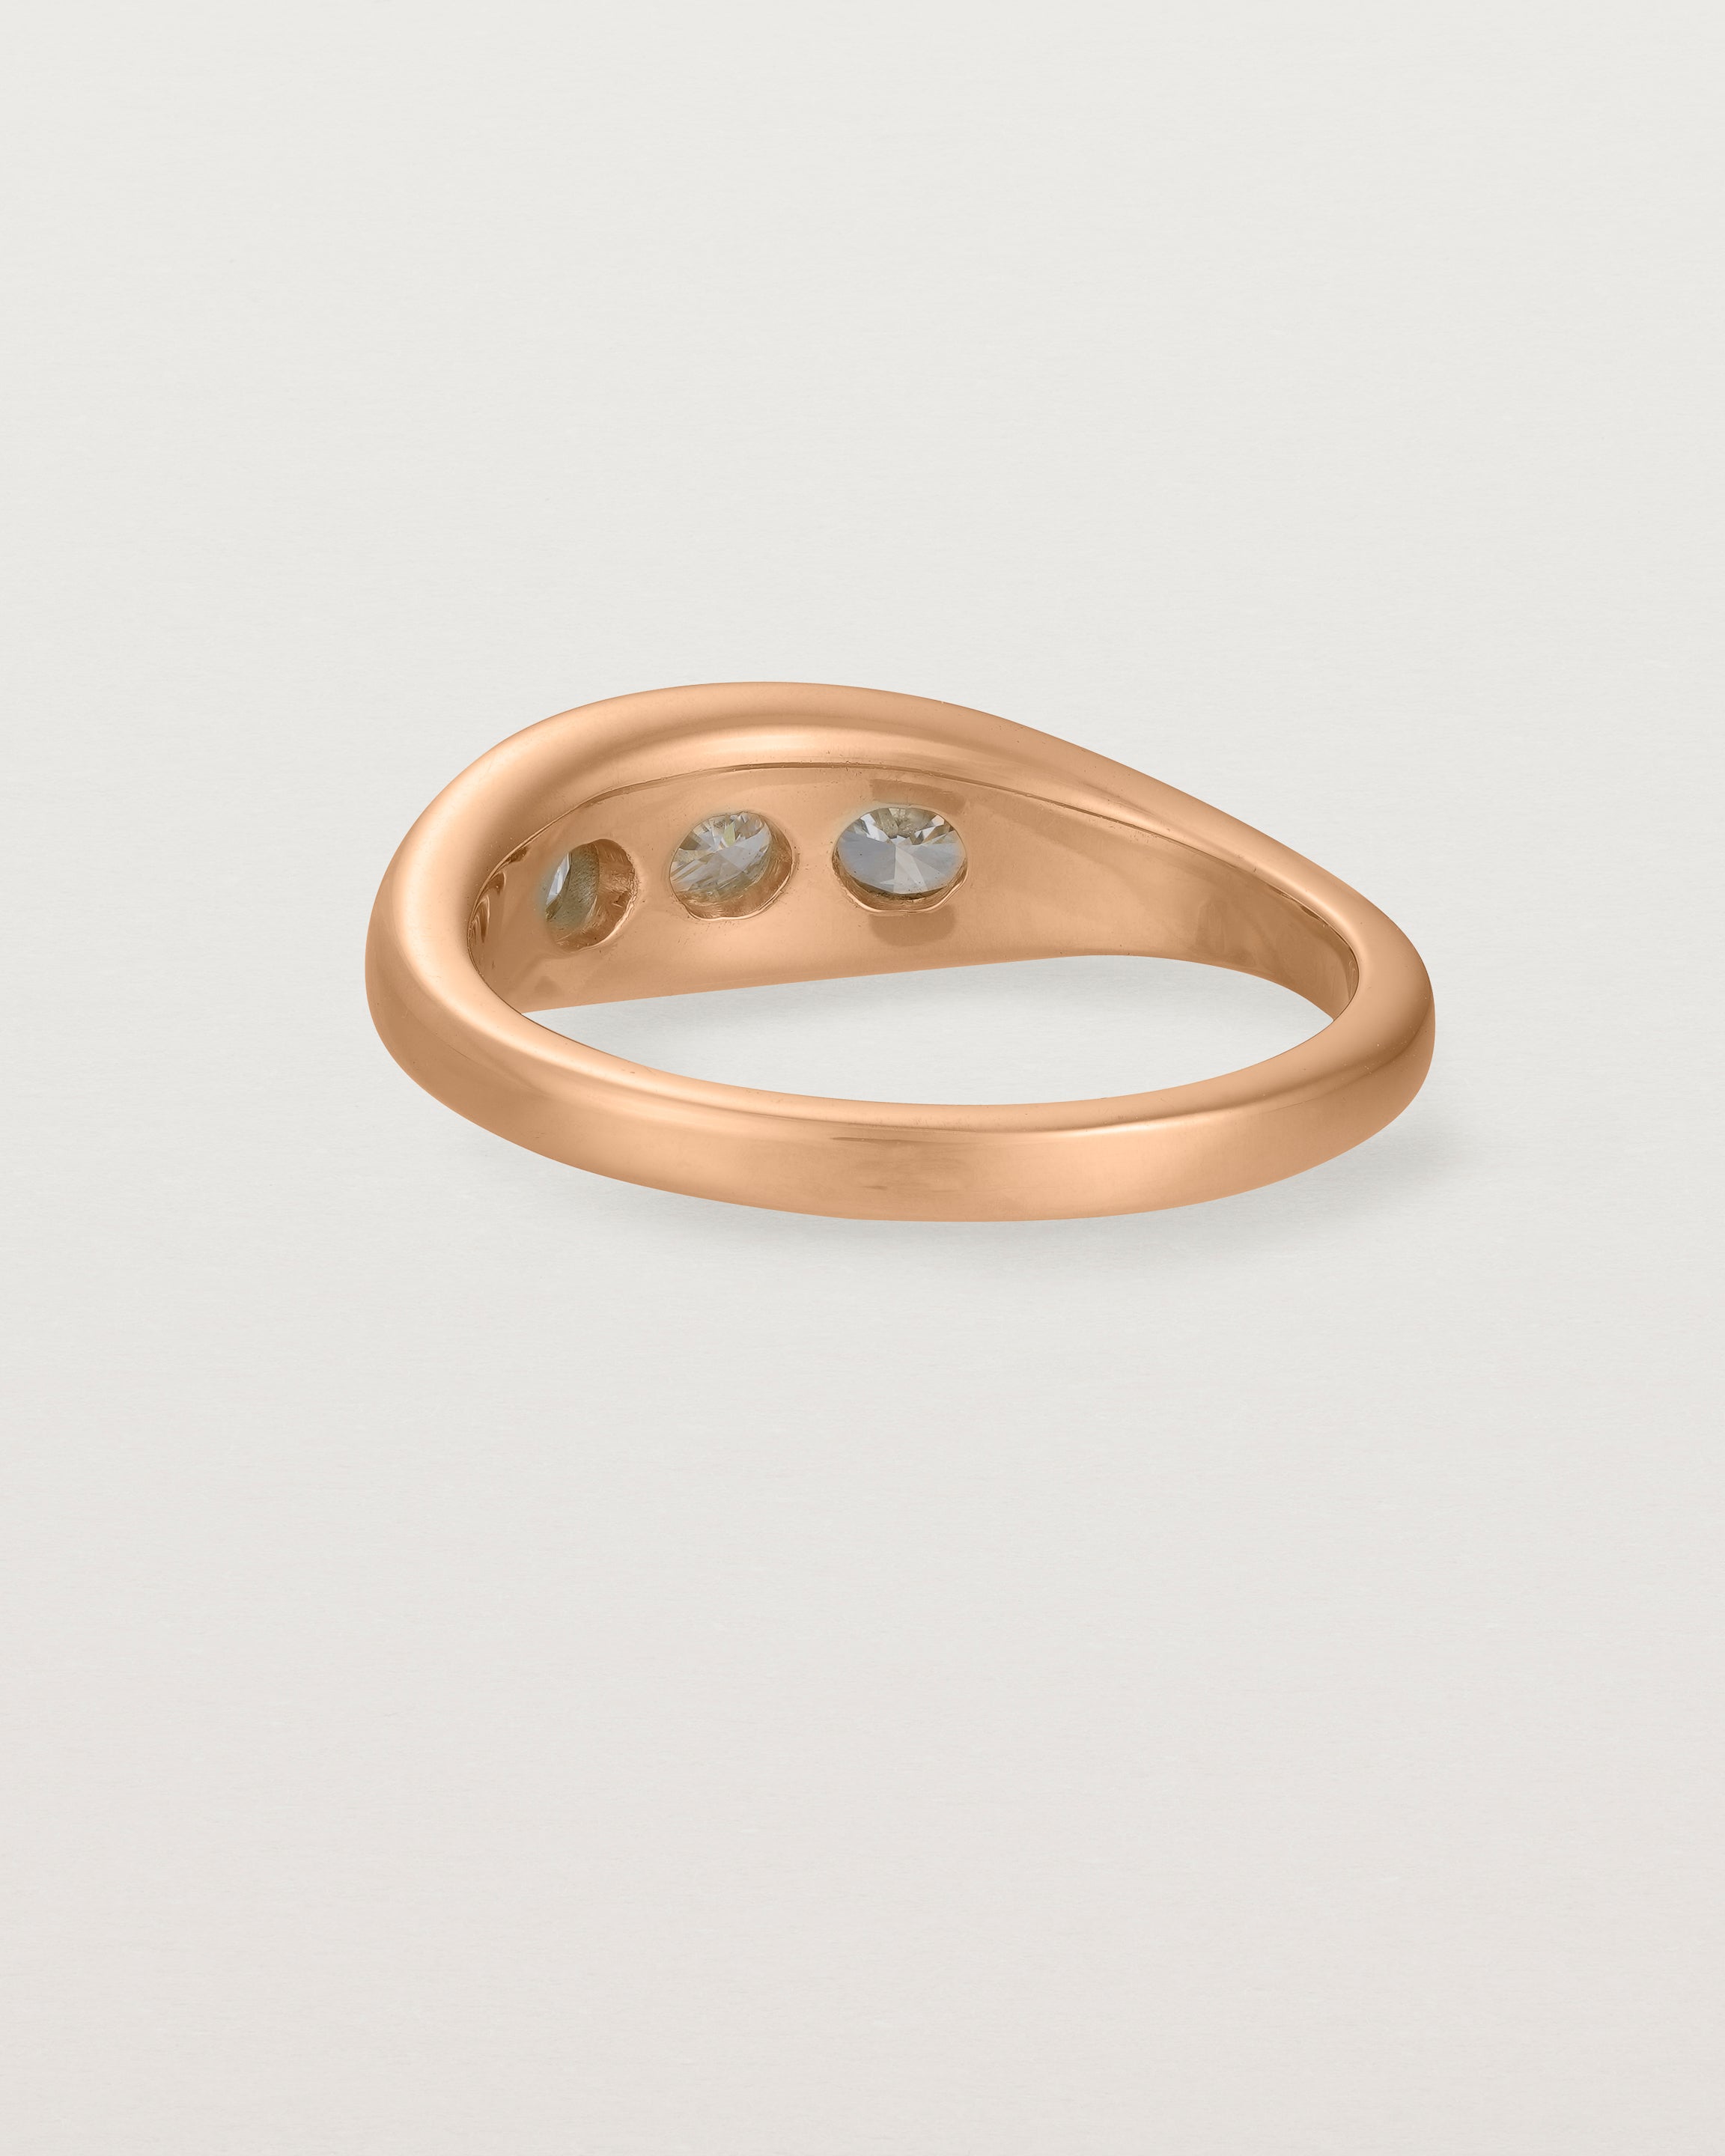 Back view of the Seule Trinity Ring | Diamonds | Rose Gold.